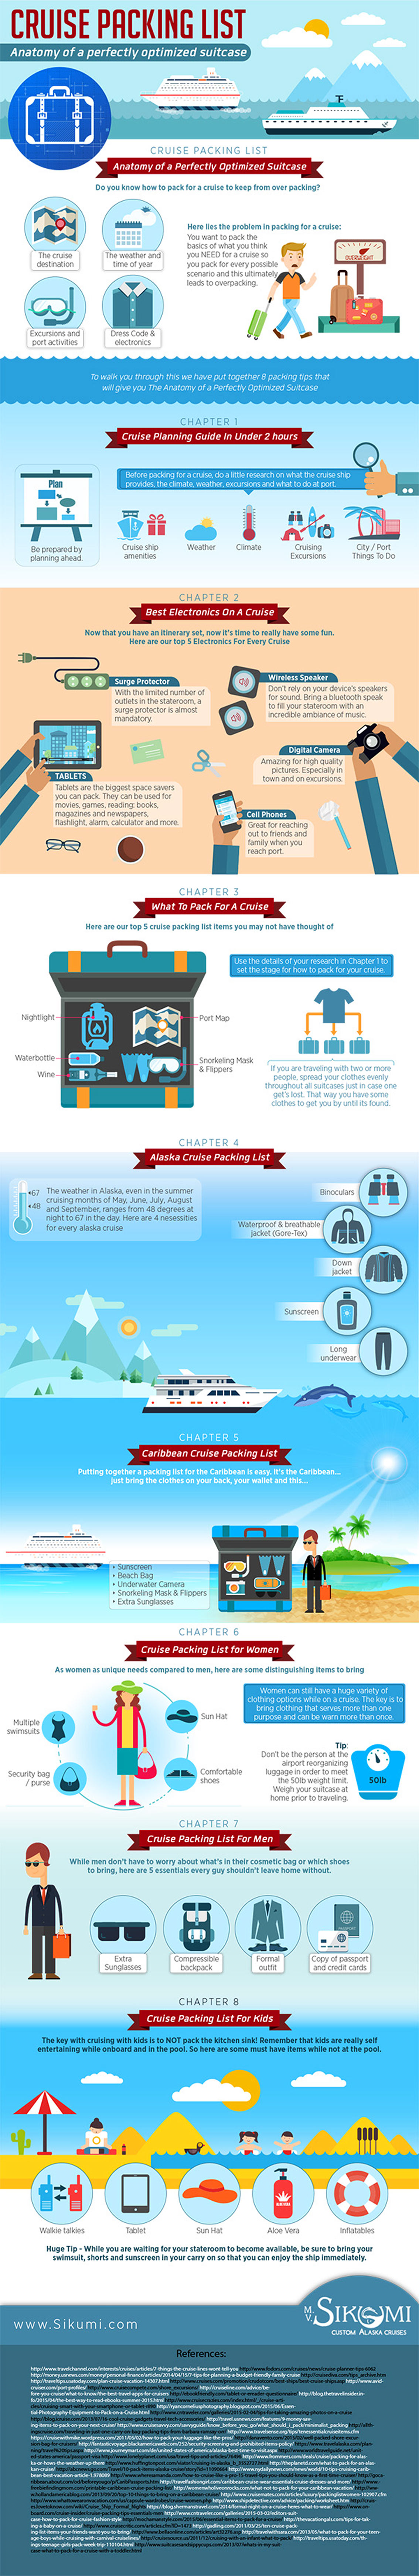 Cruise Packing List Infographic